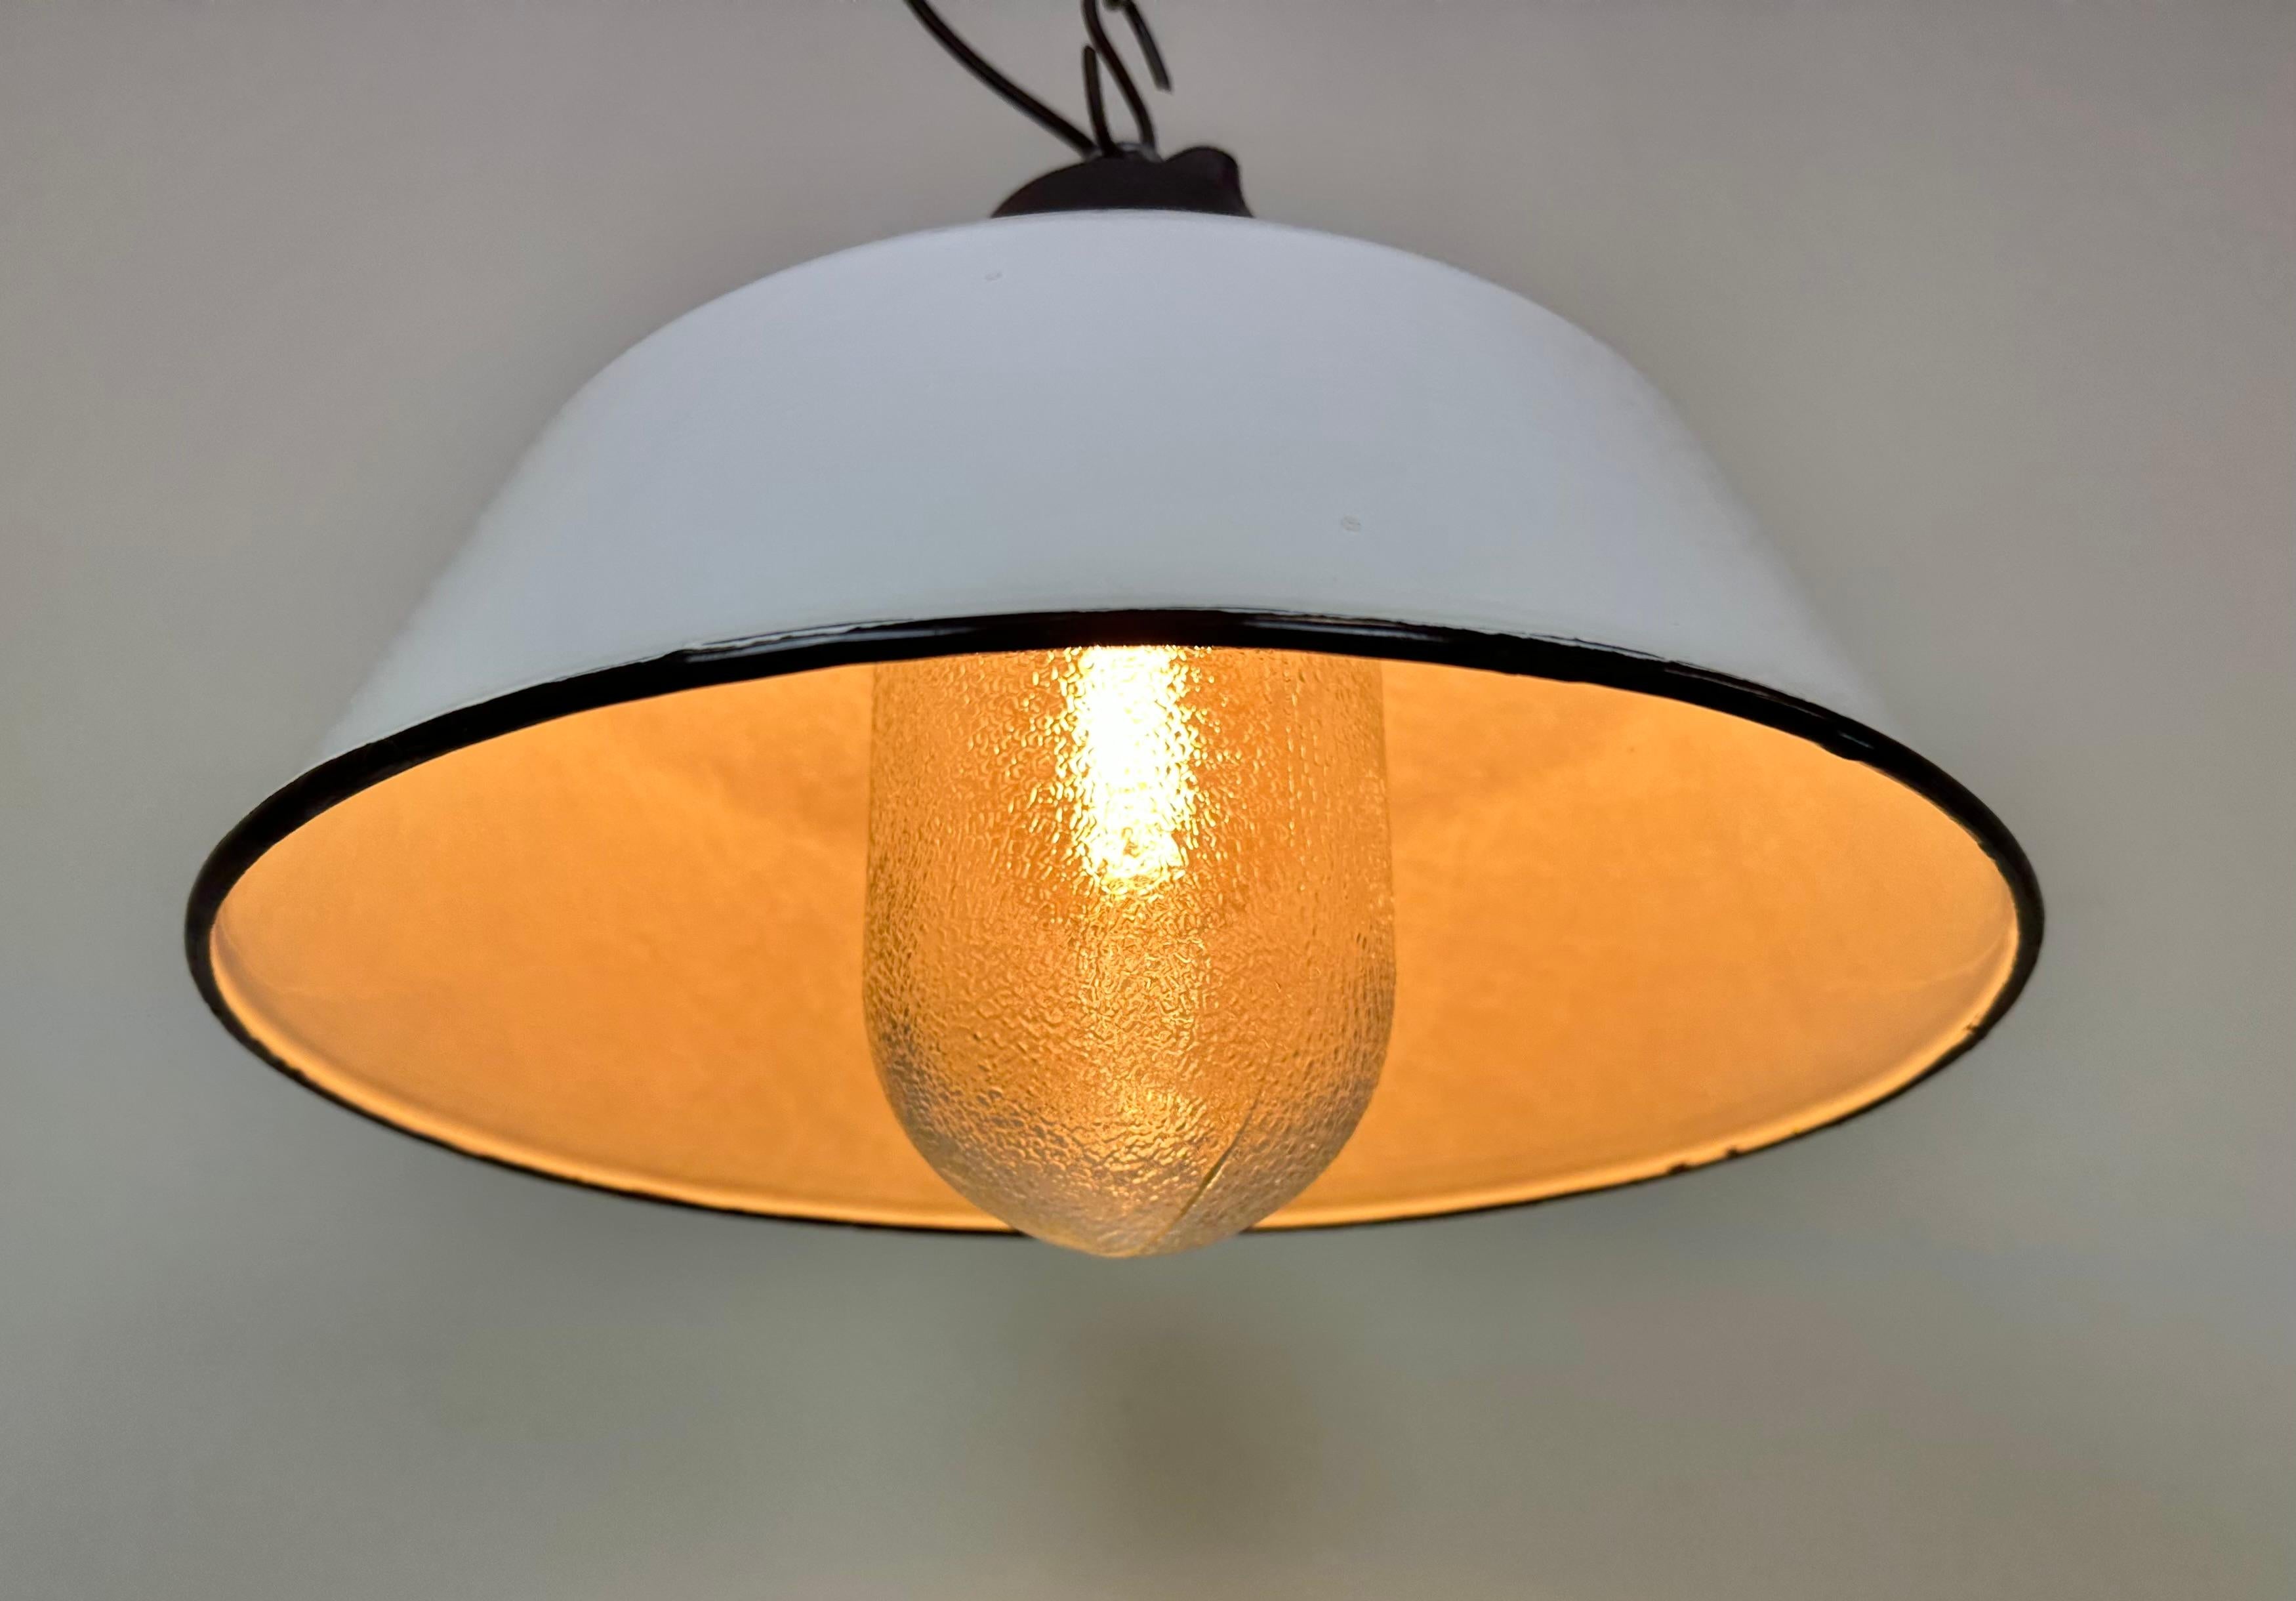 White Enamel and Cast Iron Industrial Pendant Light with Glass Cover, 1960s For Sale 6